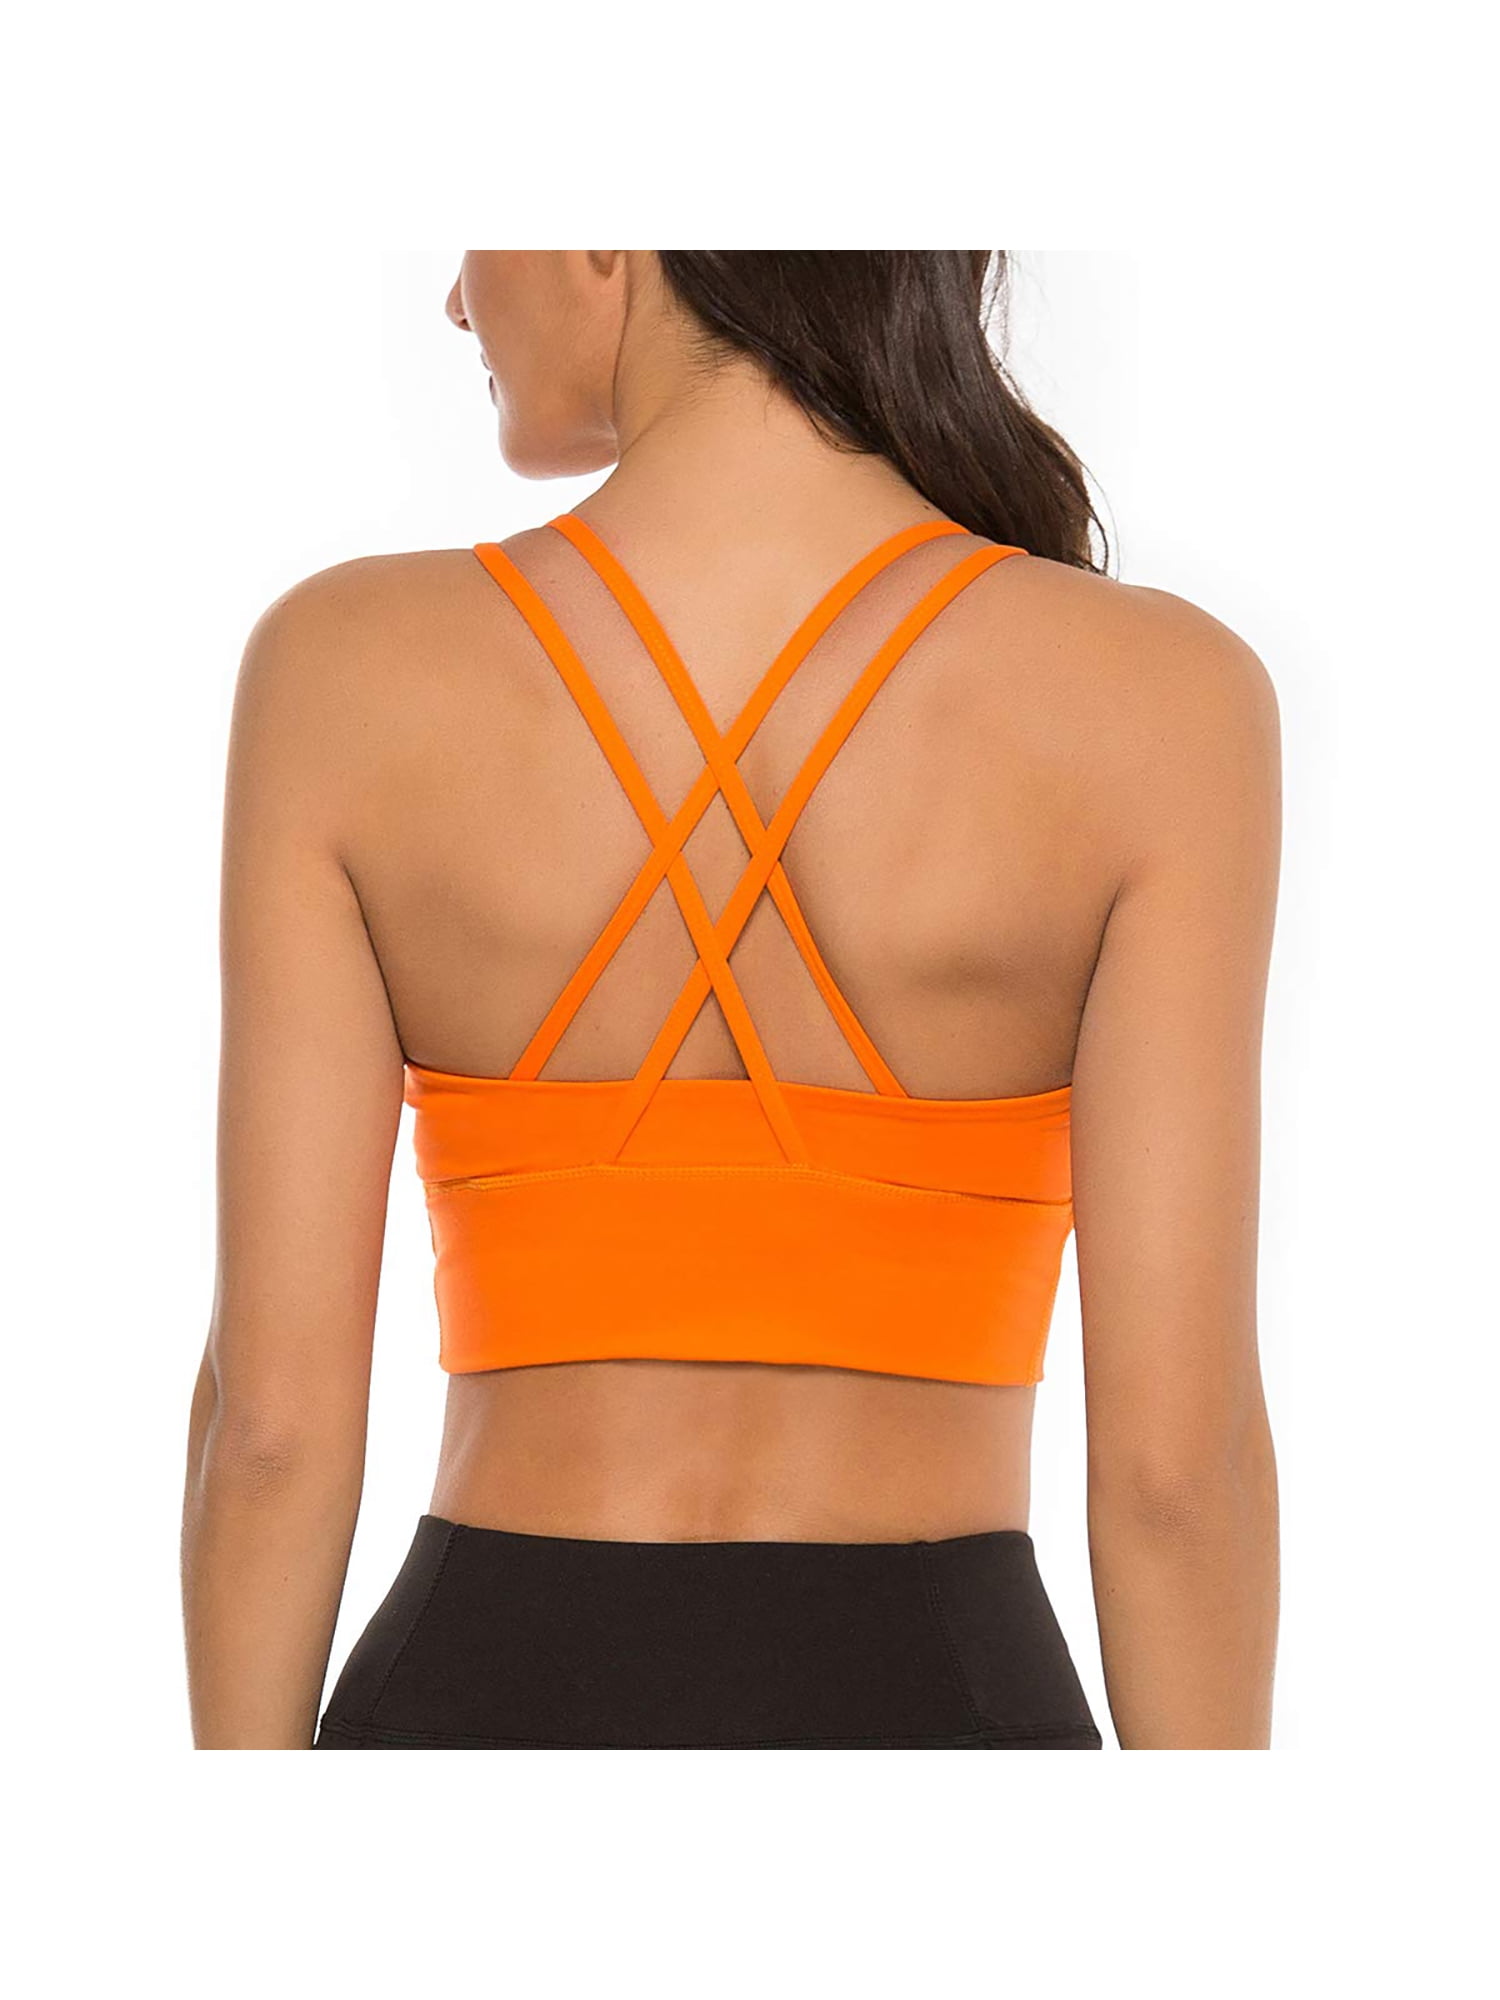  Strappy Sports Bra for Women,High Impact Sports Bra,Seamless Sports  Bra Yoga Fitness Running Workout (Color : Orange, Size : XX-Large) :  Clothing, Shoes & Jewelry